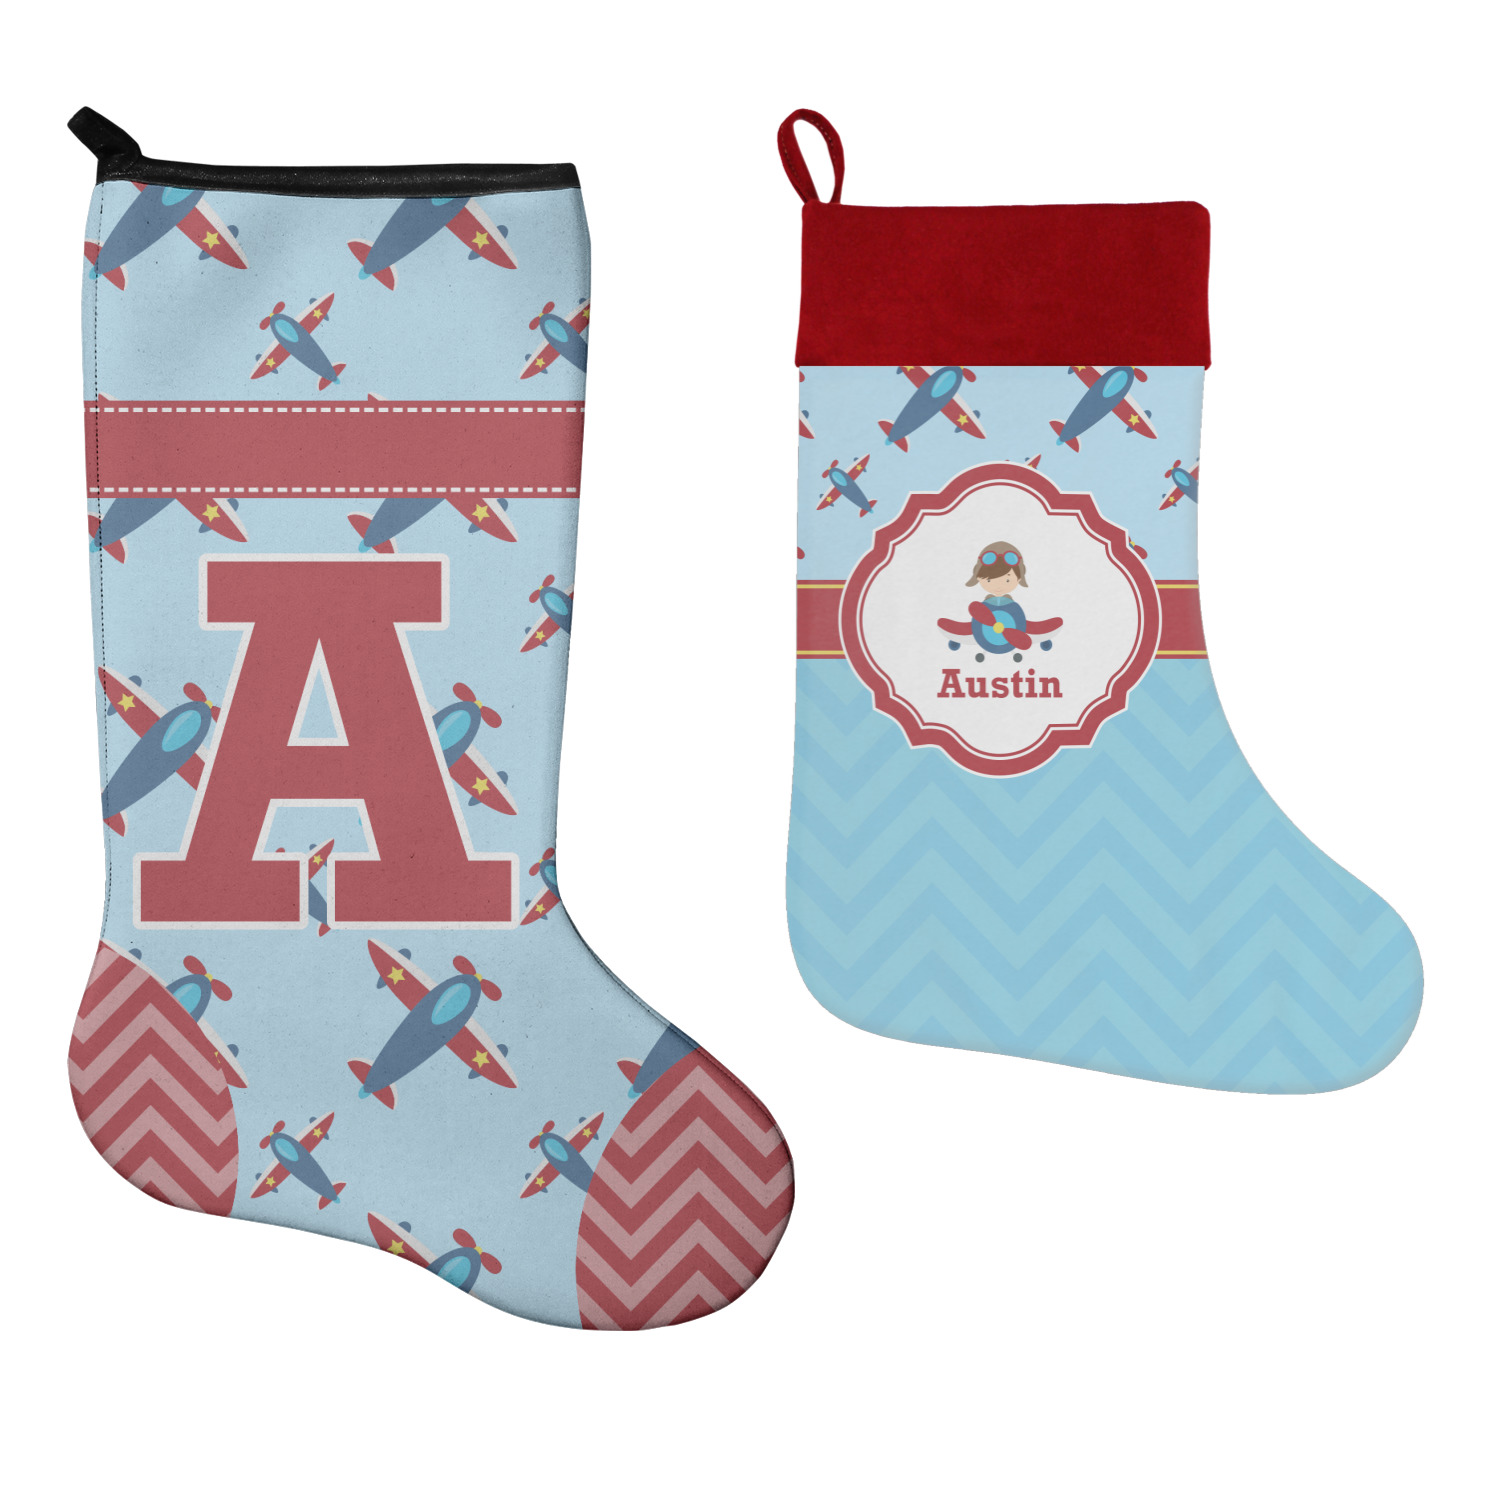 https://www.youcustomizeit.com/common/MAKE/51793/Airplane-Theme-Stockings-Side-by-Side-compare.jpg?lm=1574829458